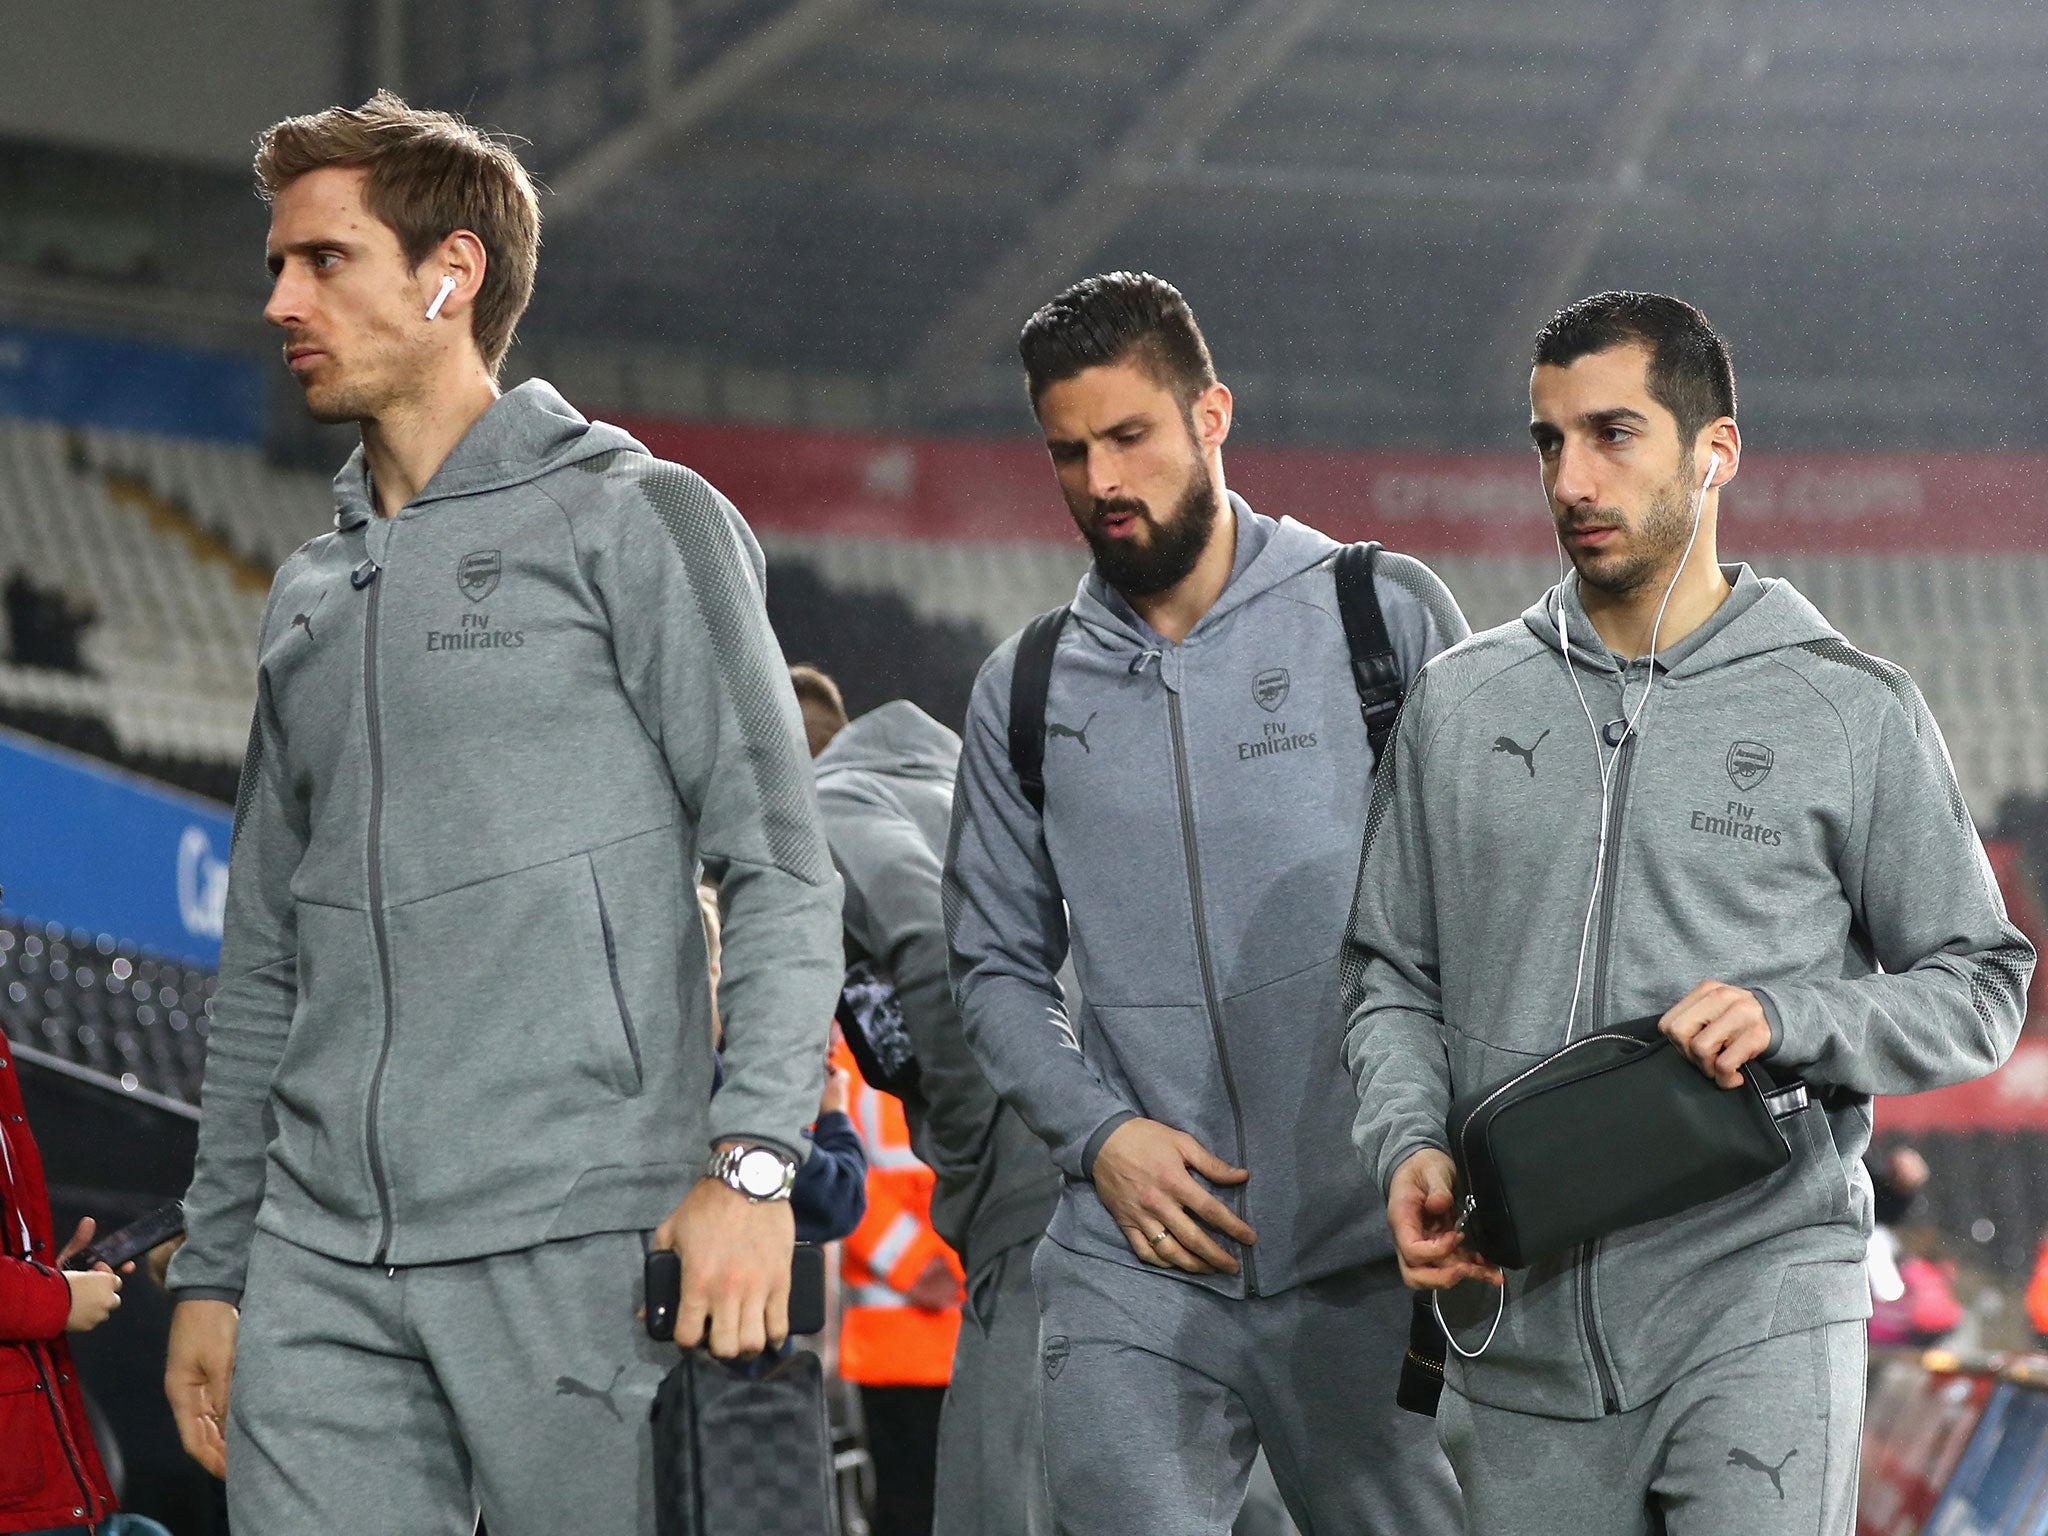 Olivier Giroud at the Liberty Stadium with his Arsenal teammates